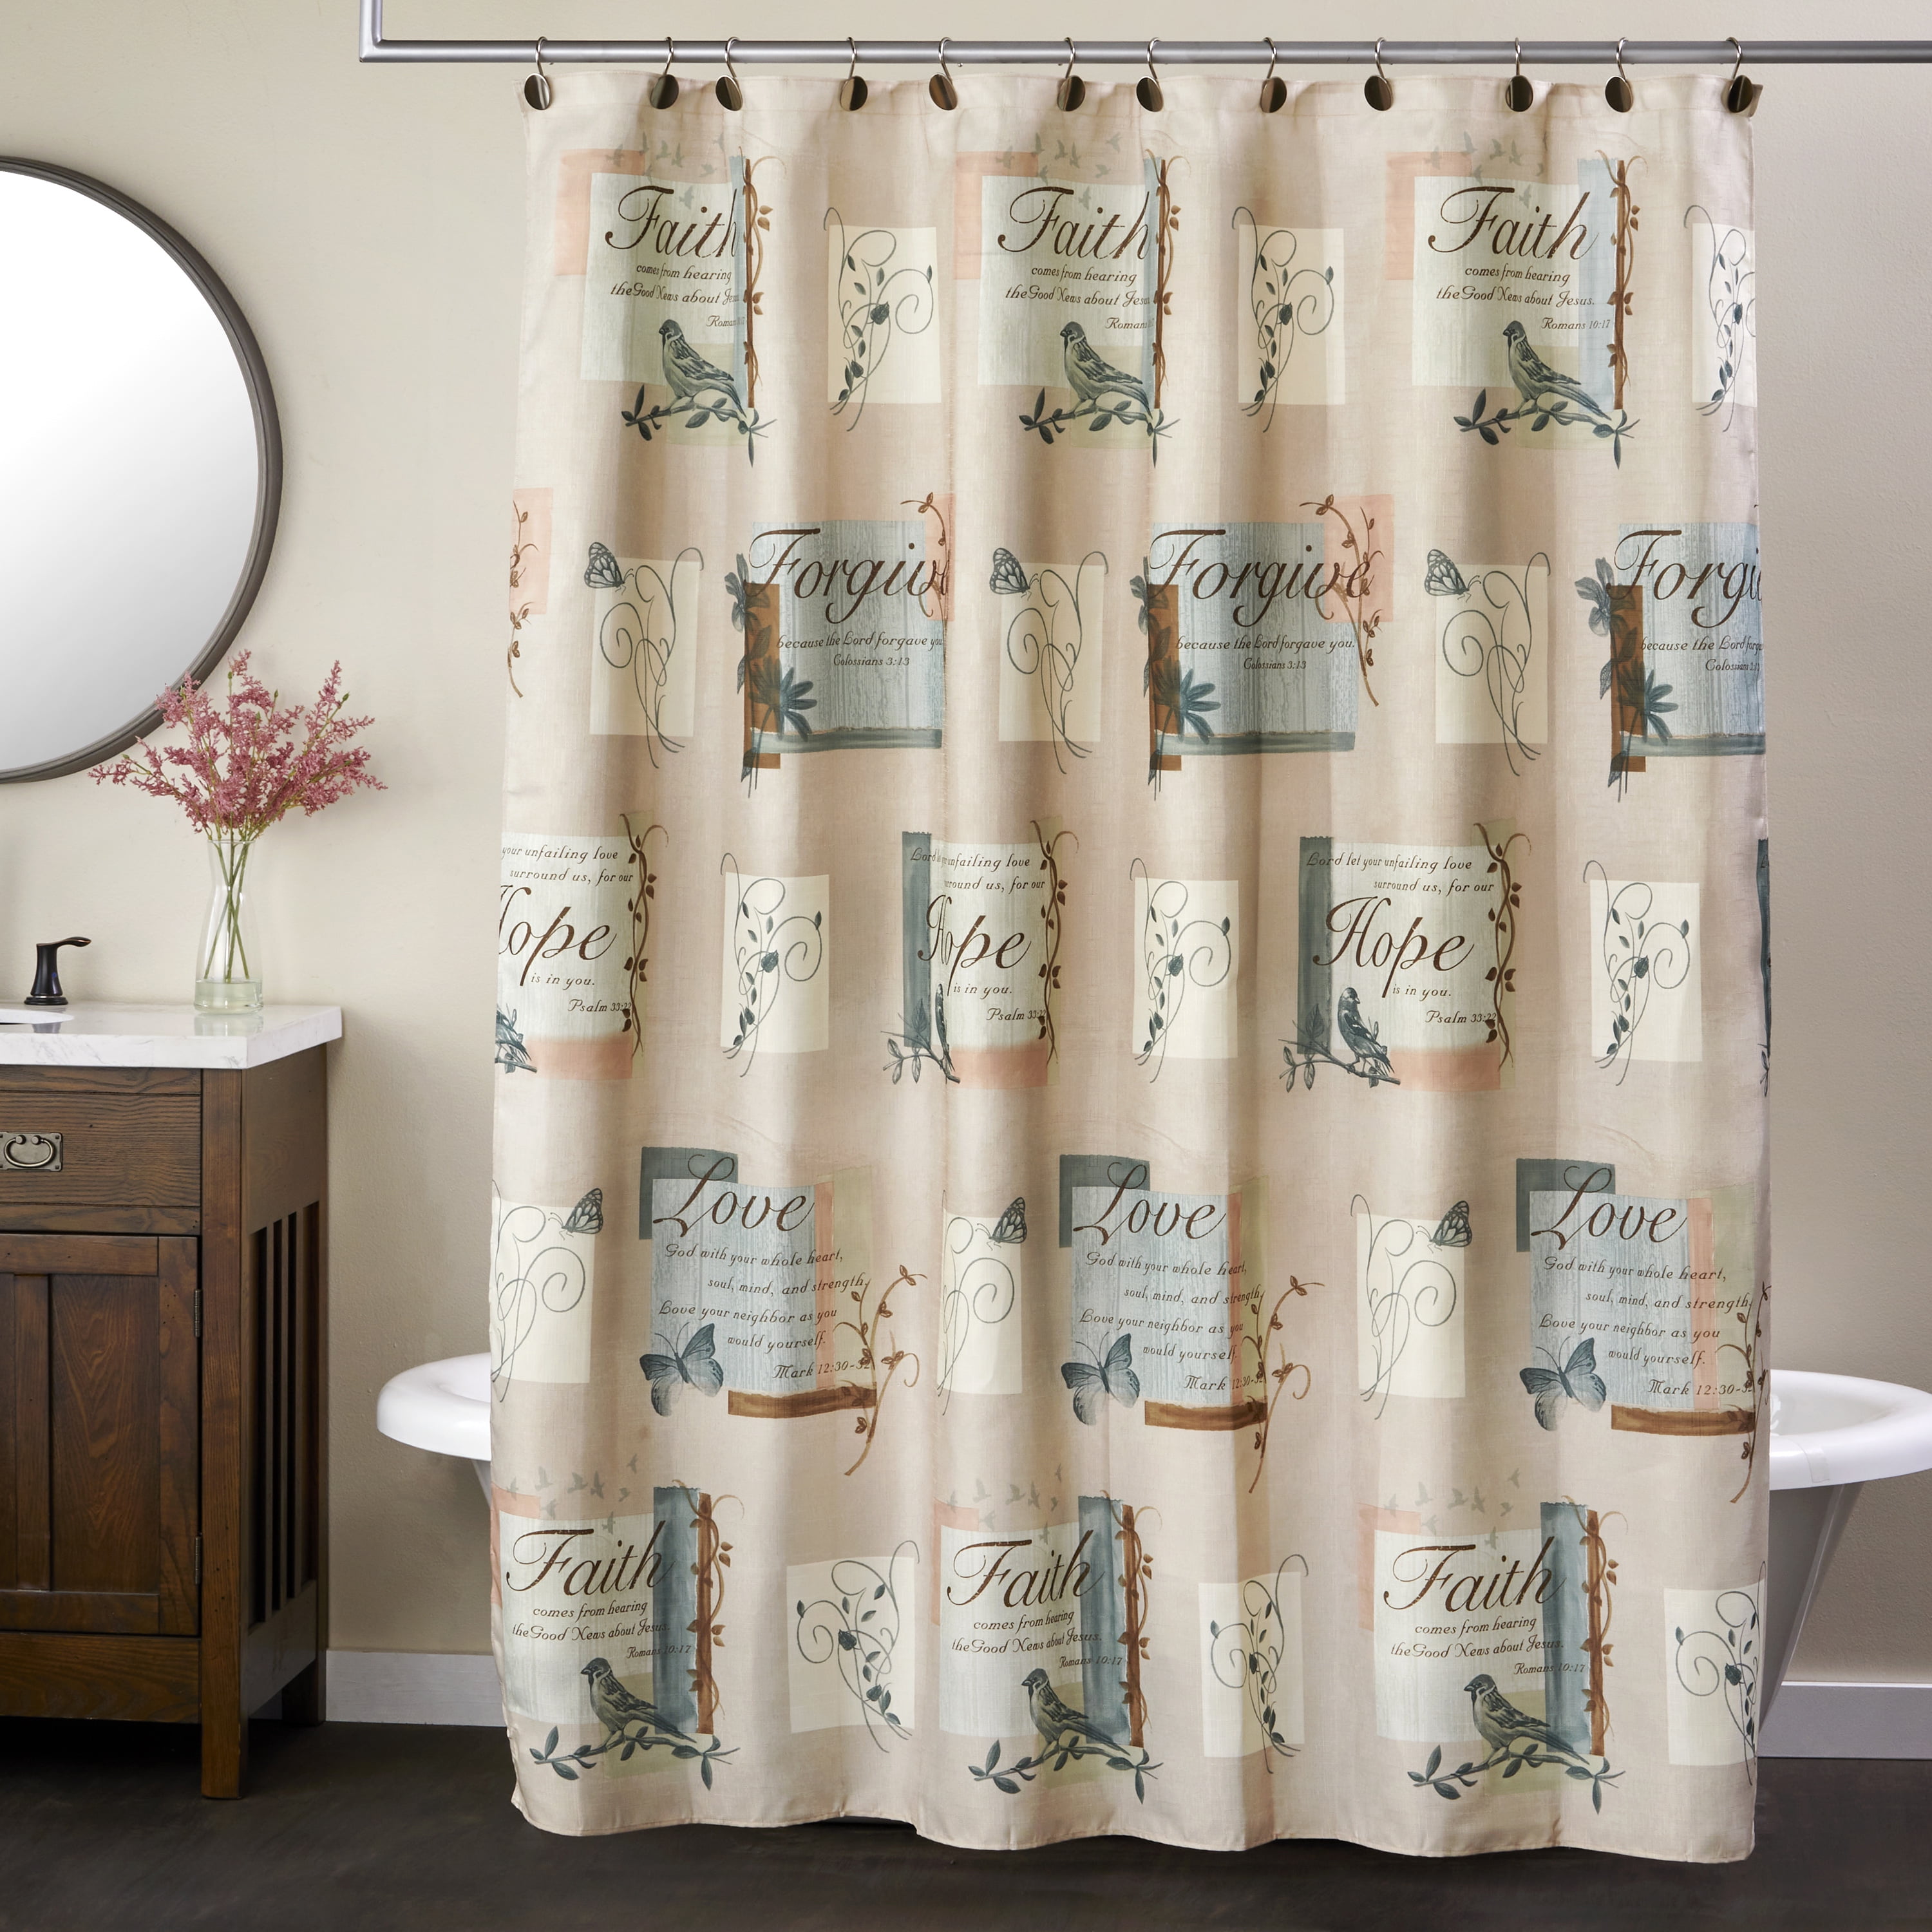 Jumping Horse Profile Bath Shower Curtains Waterproof Accessories for Bathroom 